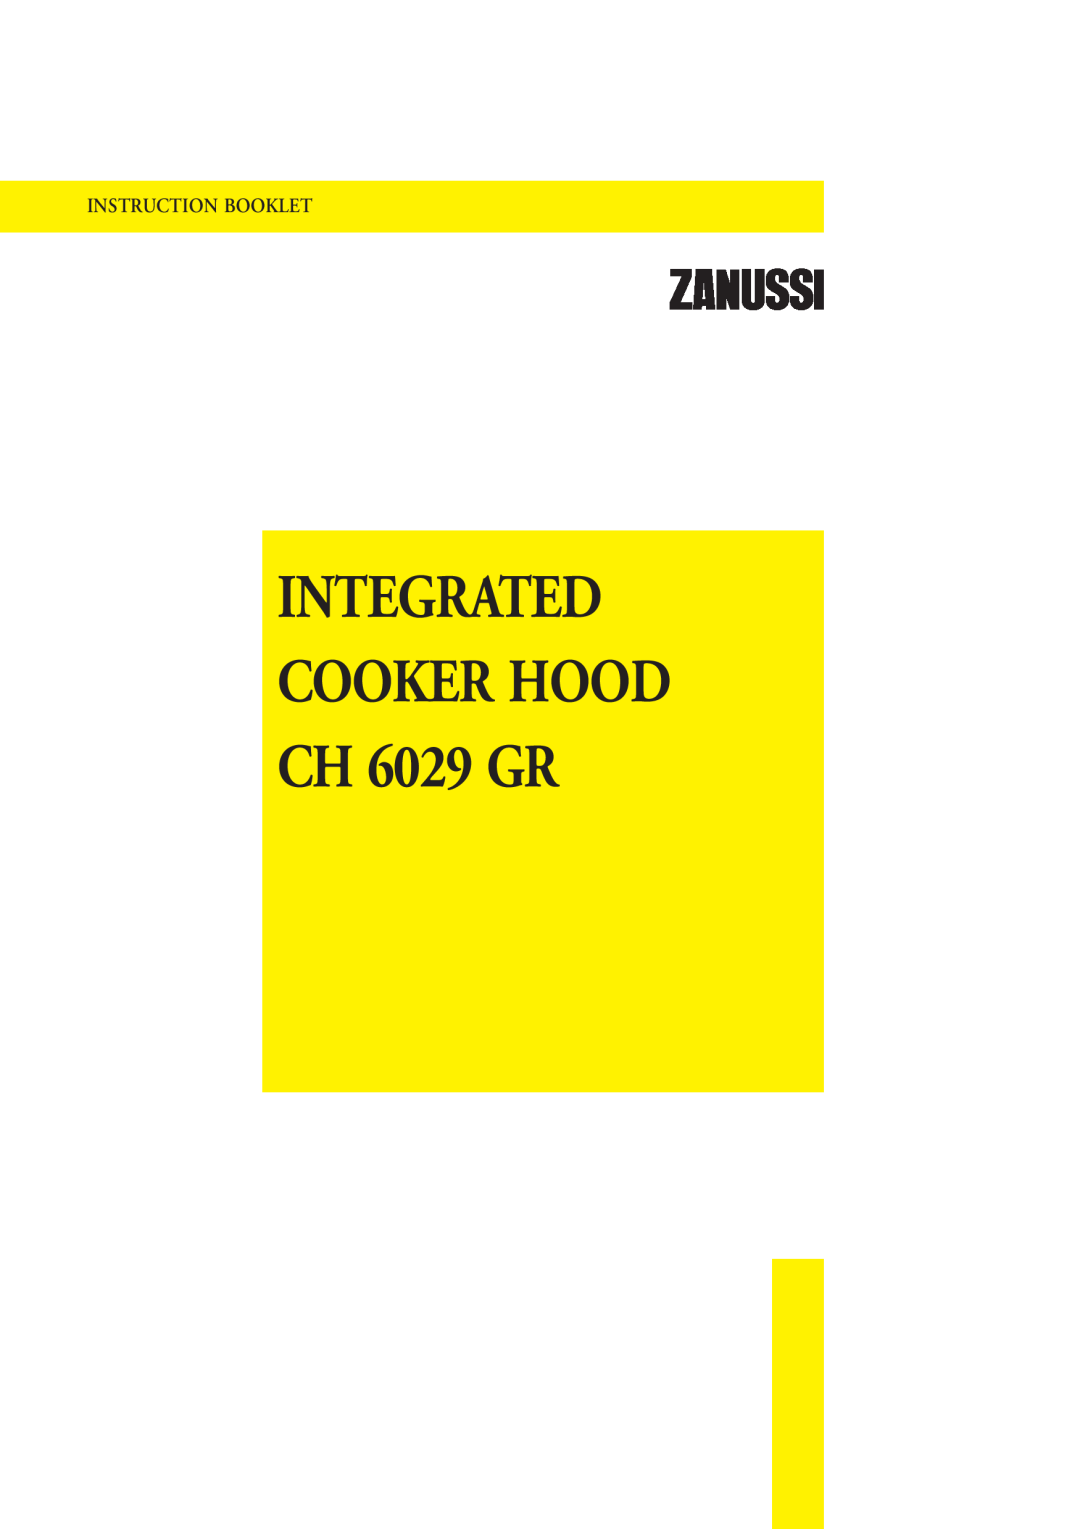 Zanussi manual INTEGRATED COOKER HOOD CH 6029 GR, Instruction Booklet 